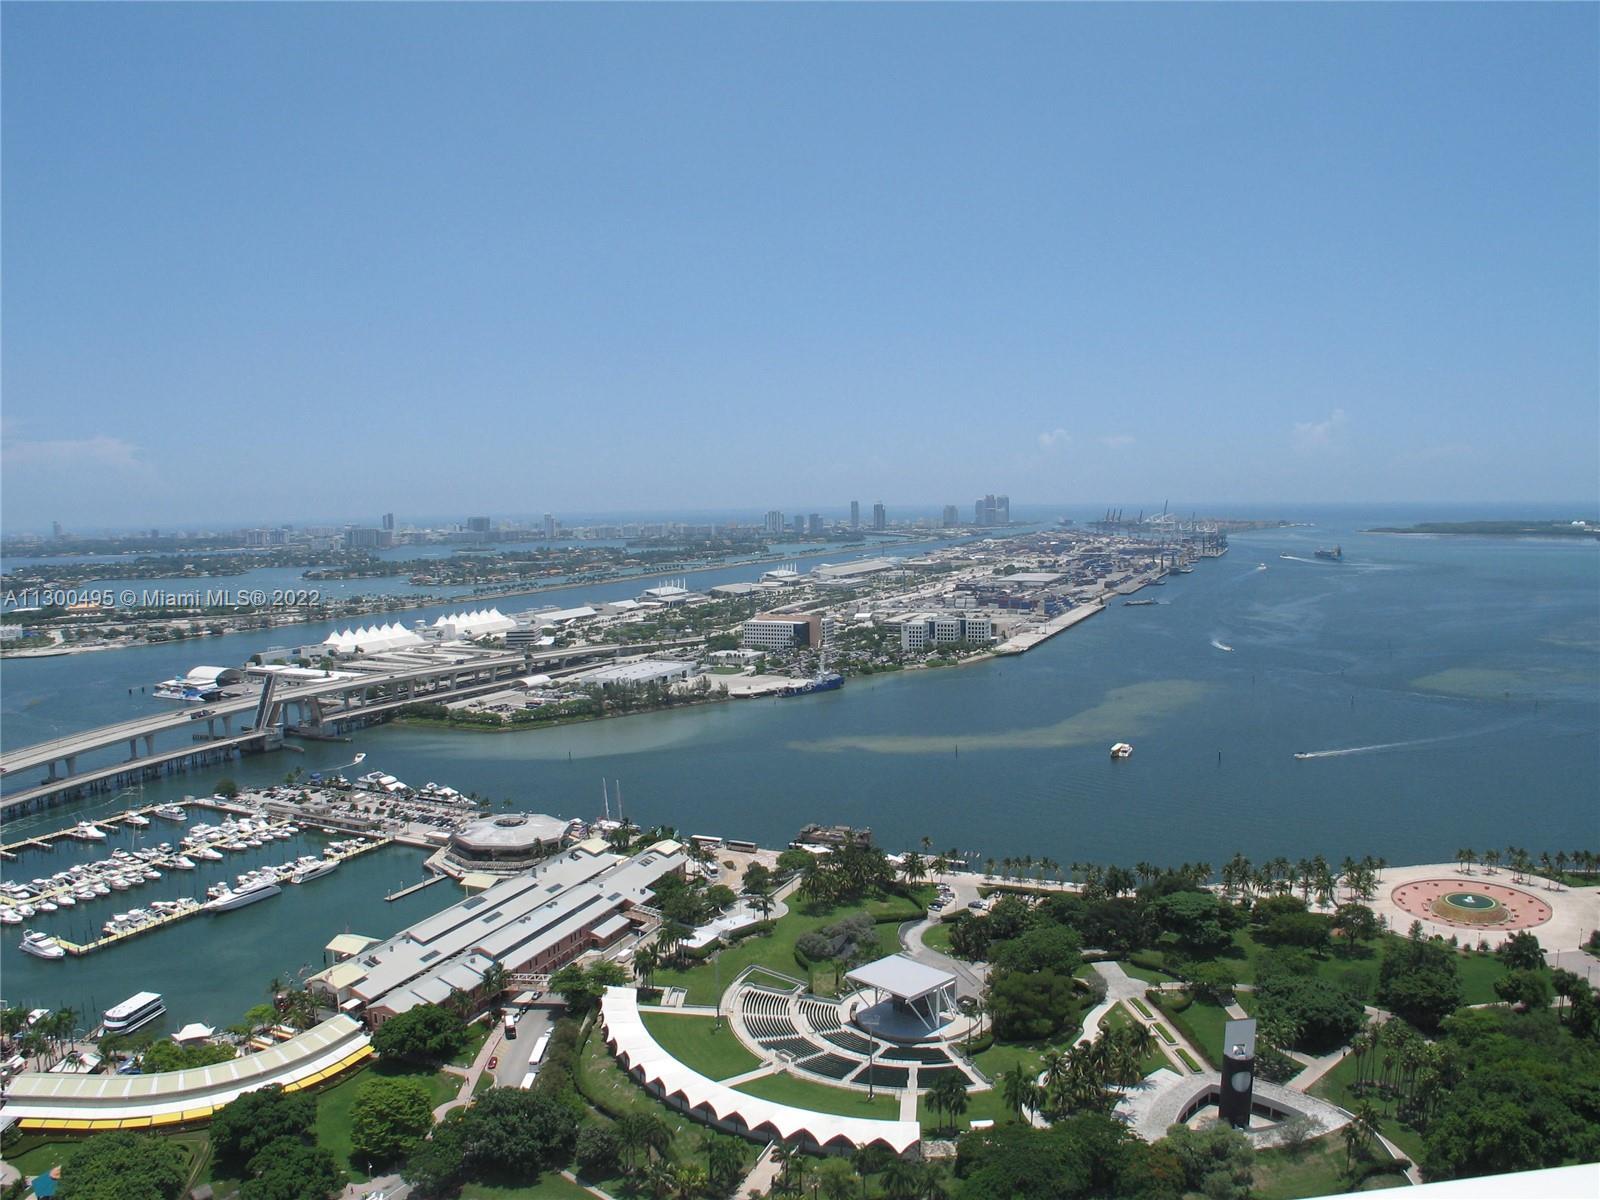 Stunning unobstructed panoramic views of Mia Marina,Bayfront park (32 waterfront acres)Biscayne bay 